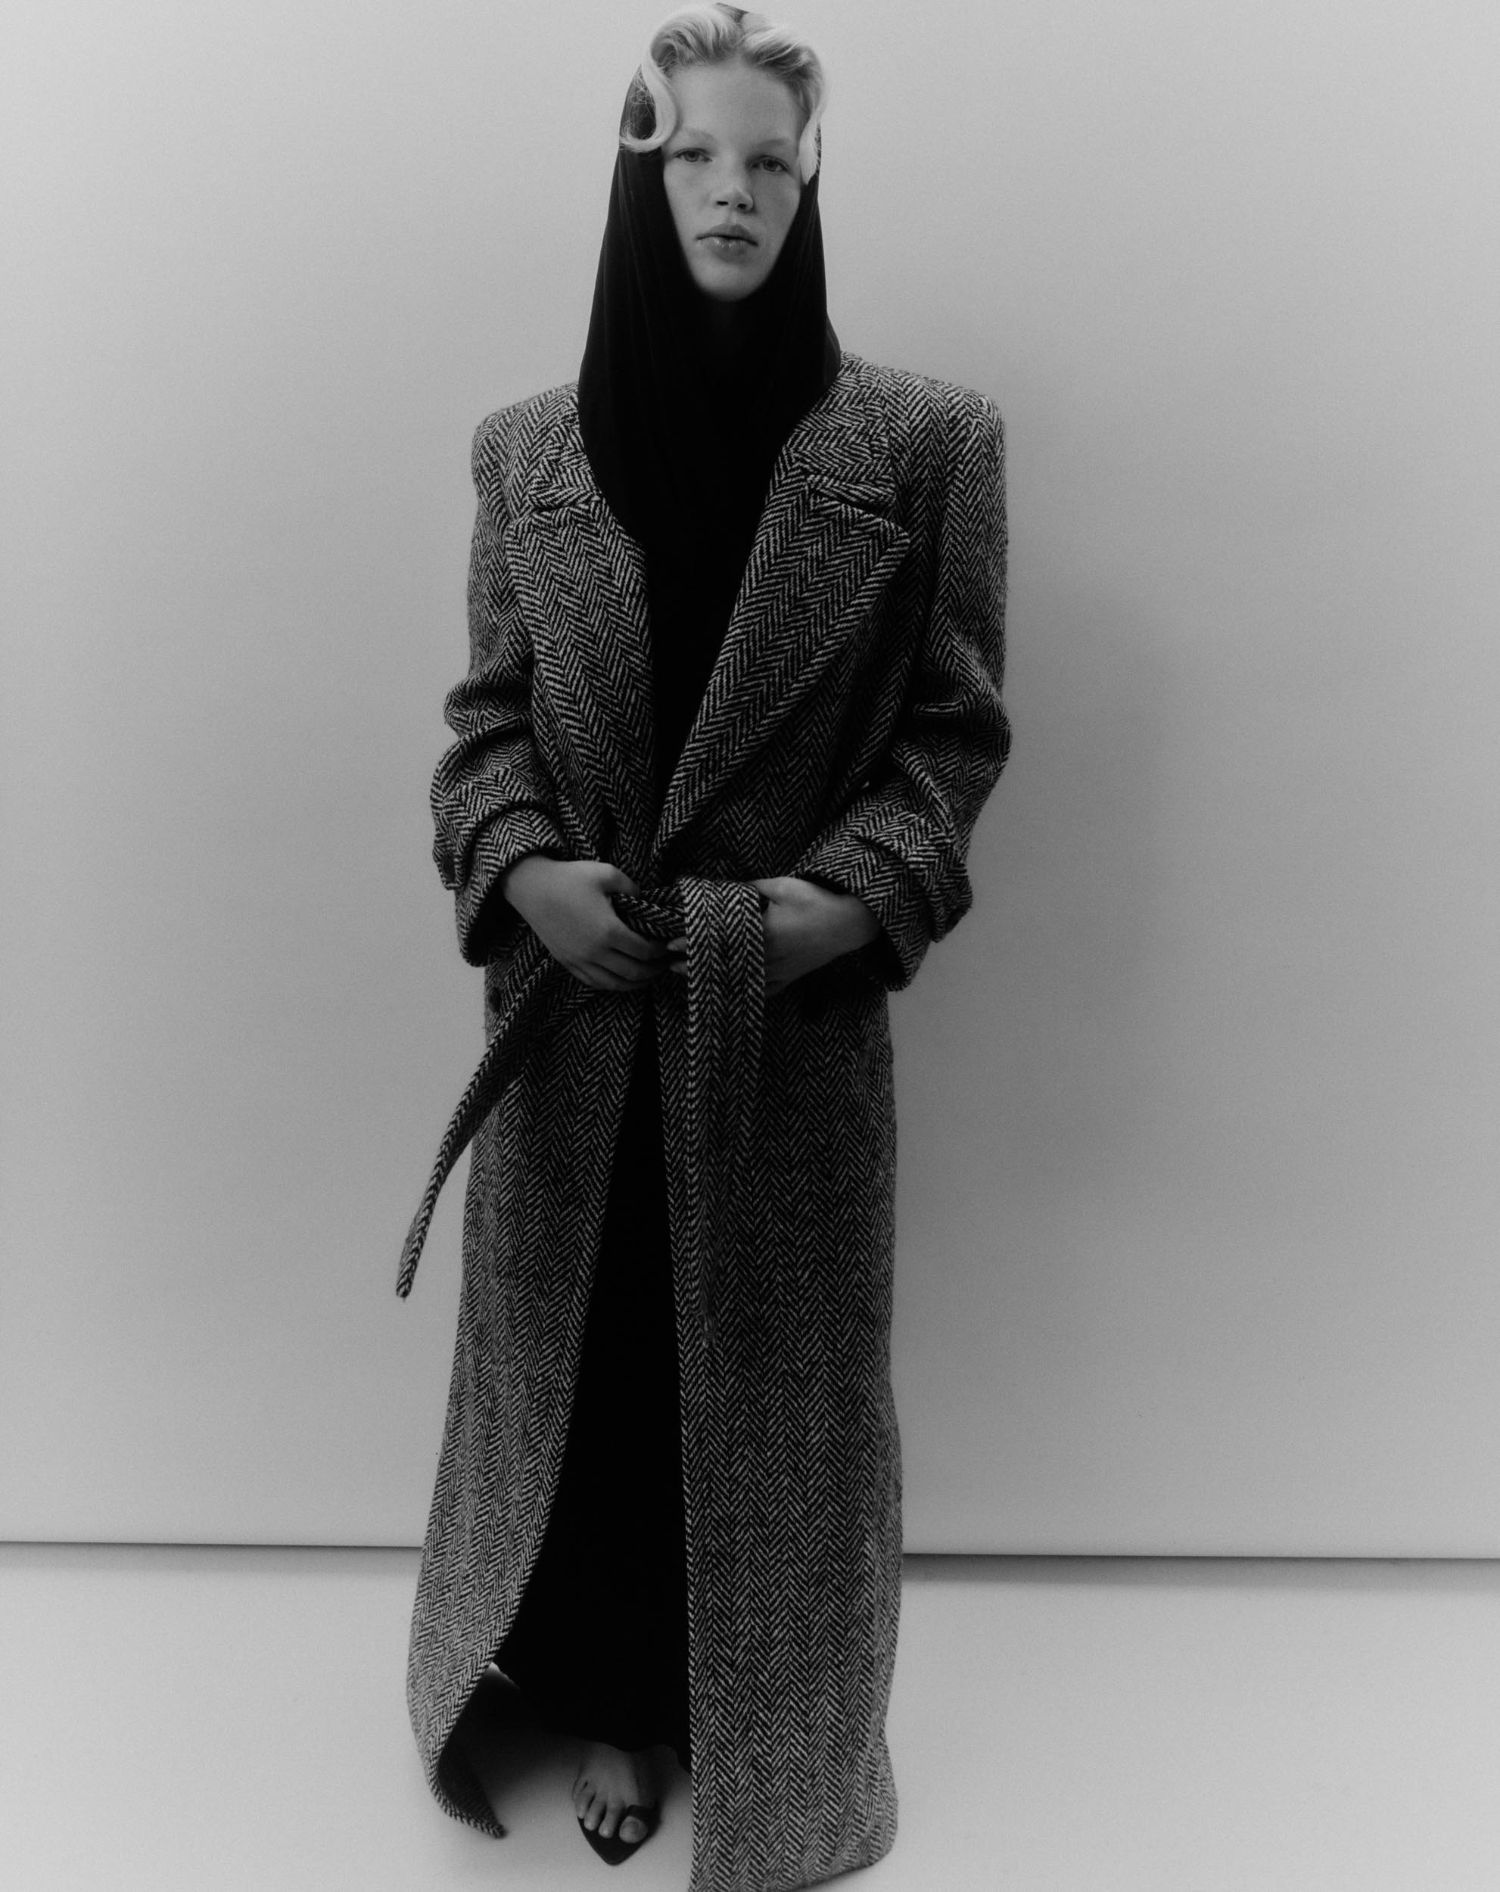 The Duality of Dressing: Luca Biggs in Saint Laurent by Matthieu Delbreuve for Document Journal Spring 2023